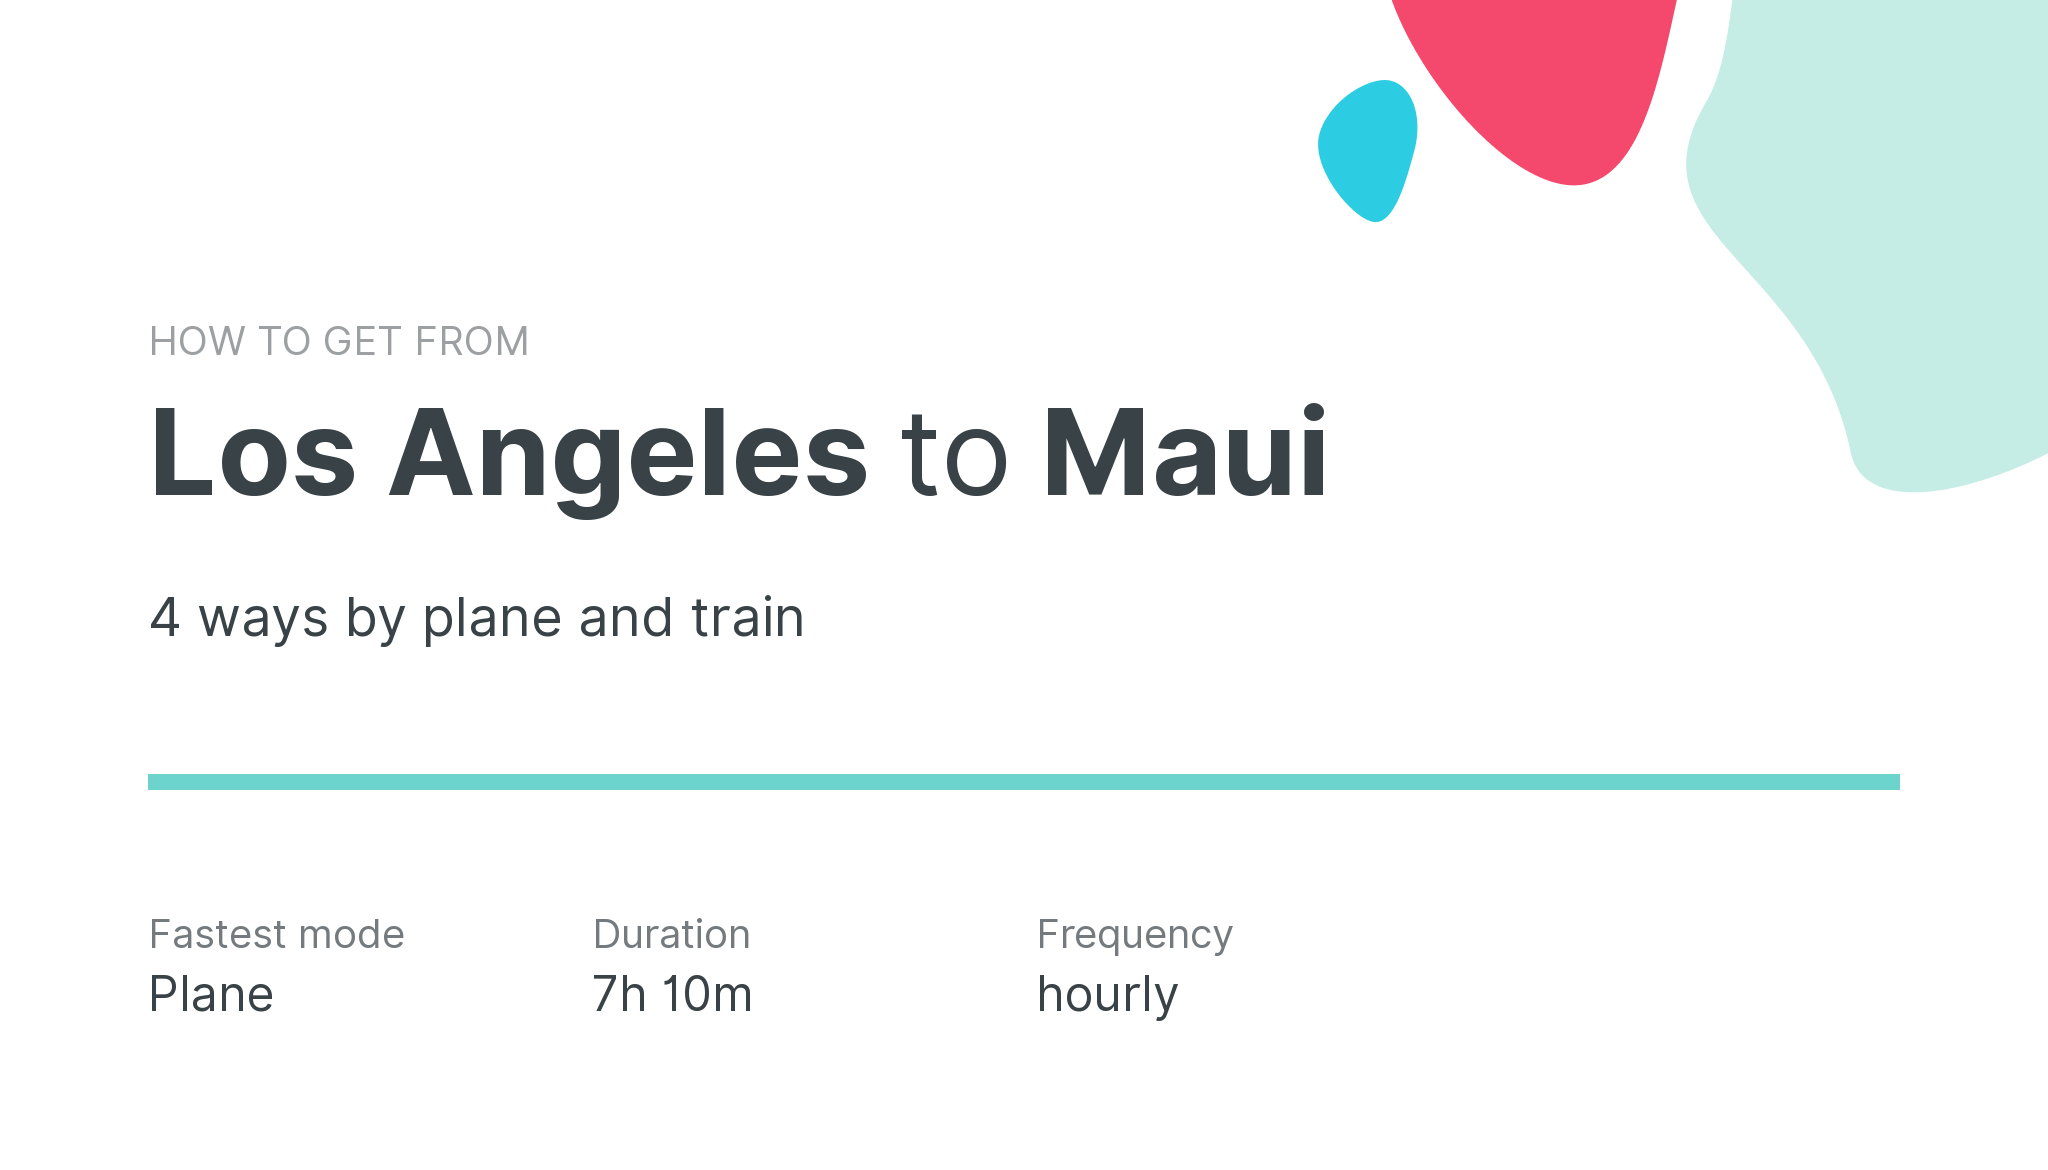 How do I get from Los Angeles to Maui